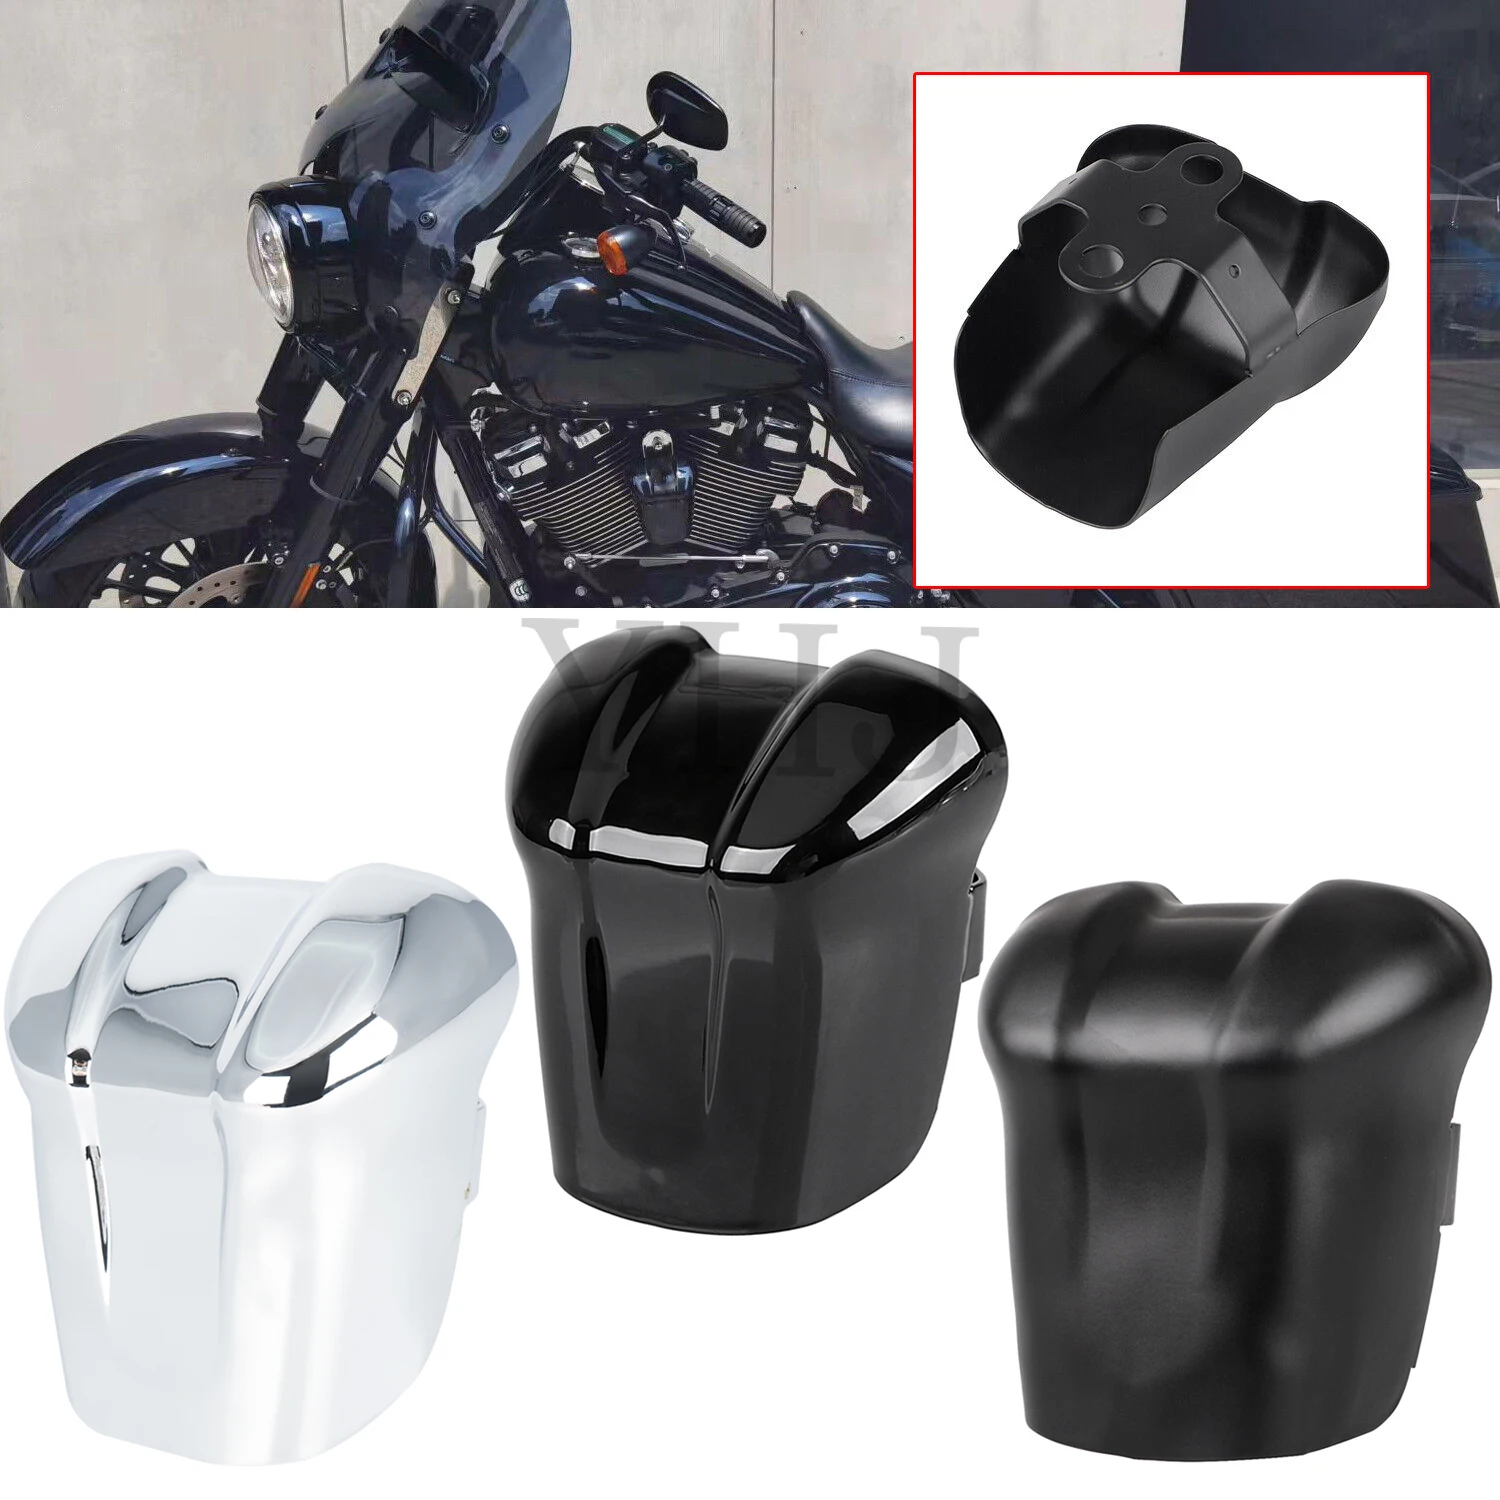 

Motorcycle Waterfall Style Horn Cover Chrome/Gloss Black/Matte Black For Harley Electra Street Road Tour Glide King 1995-2020